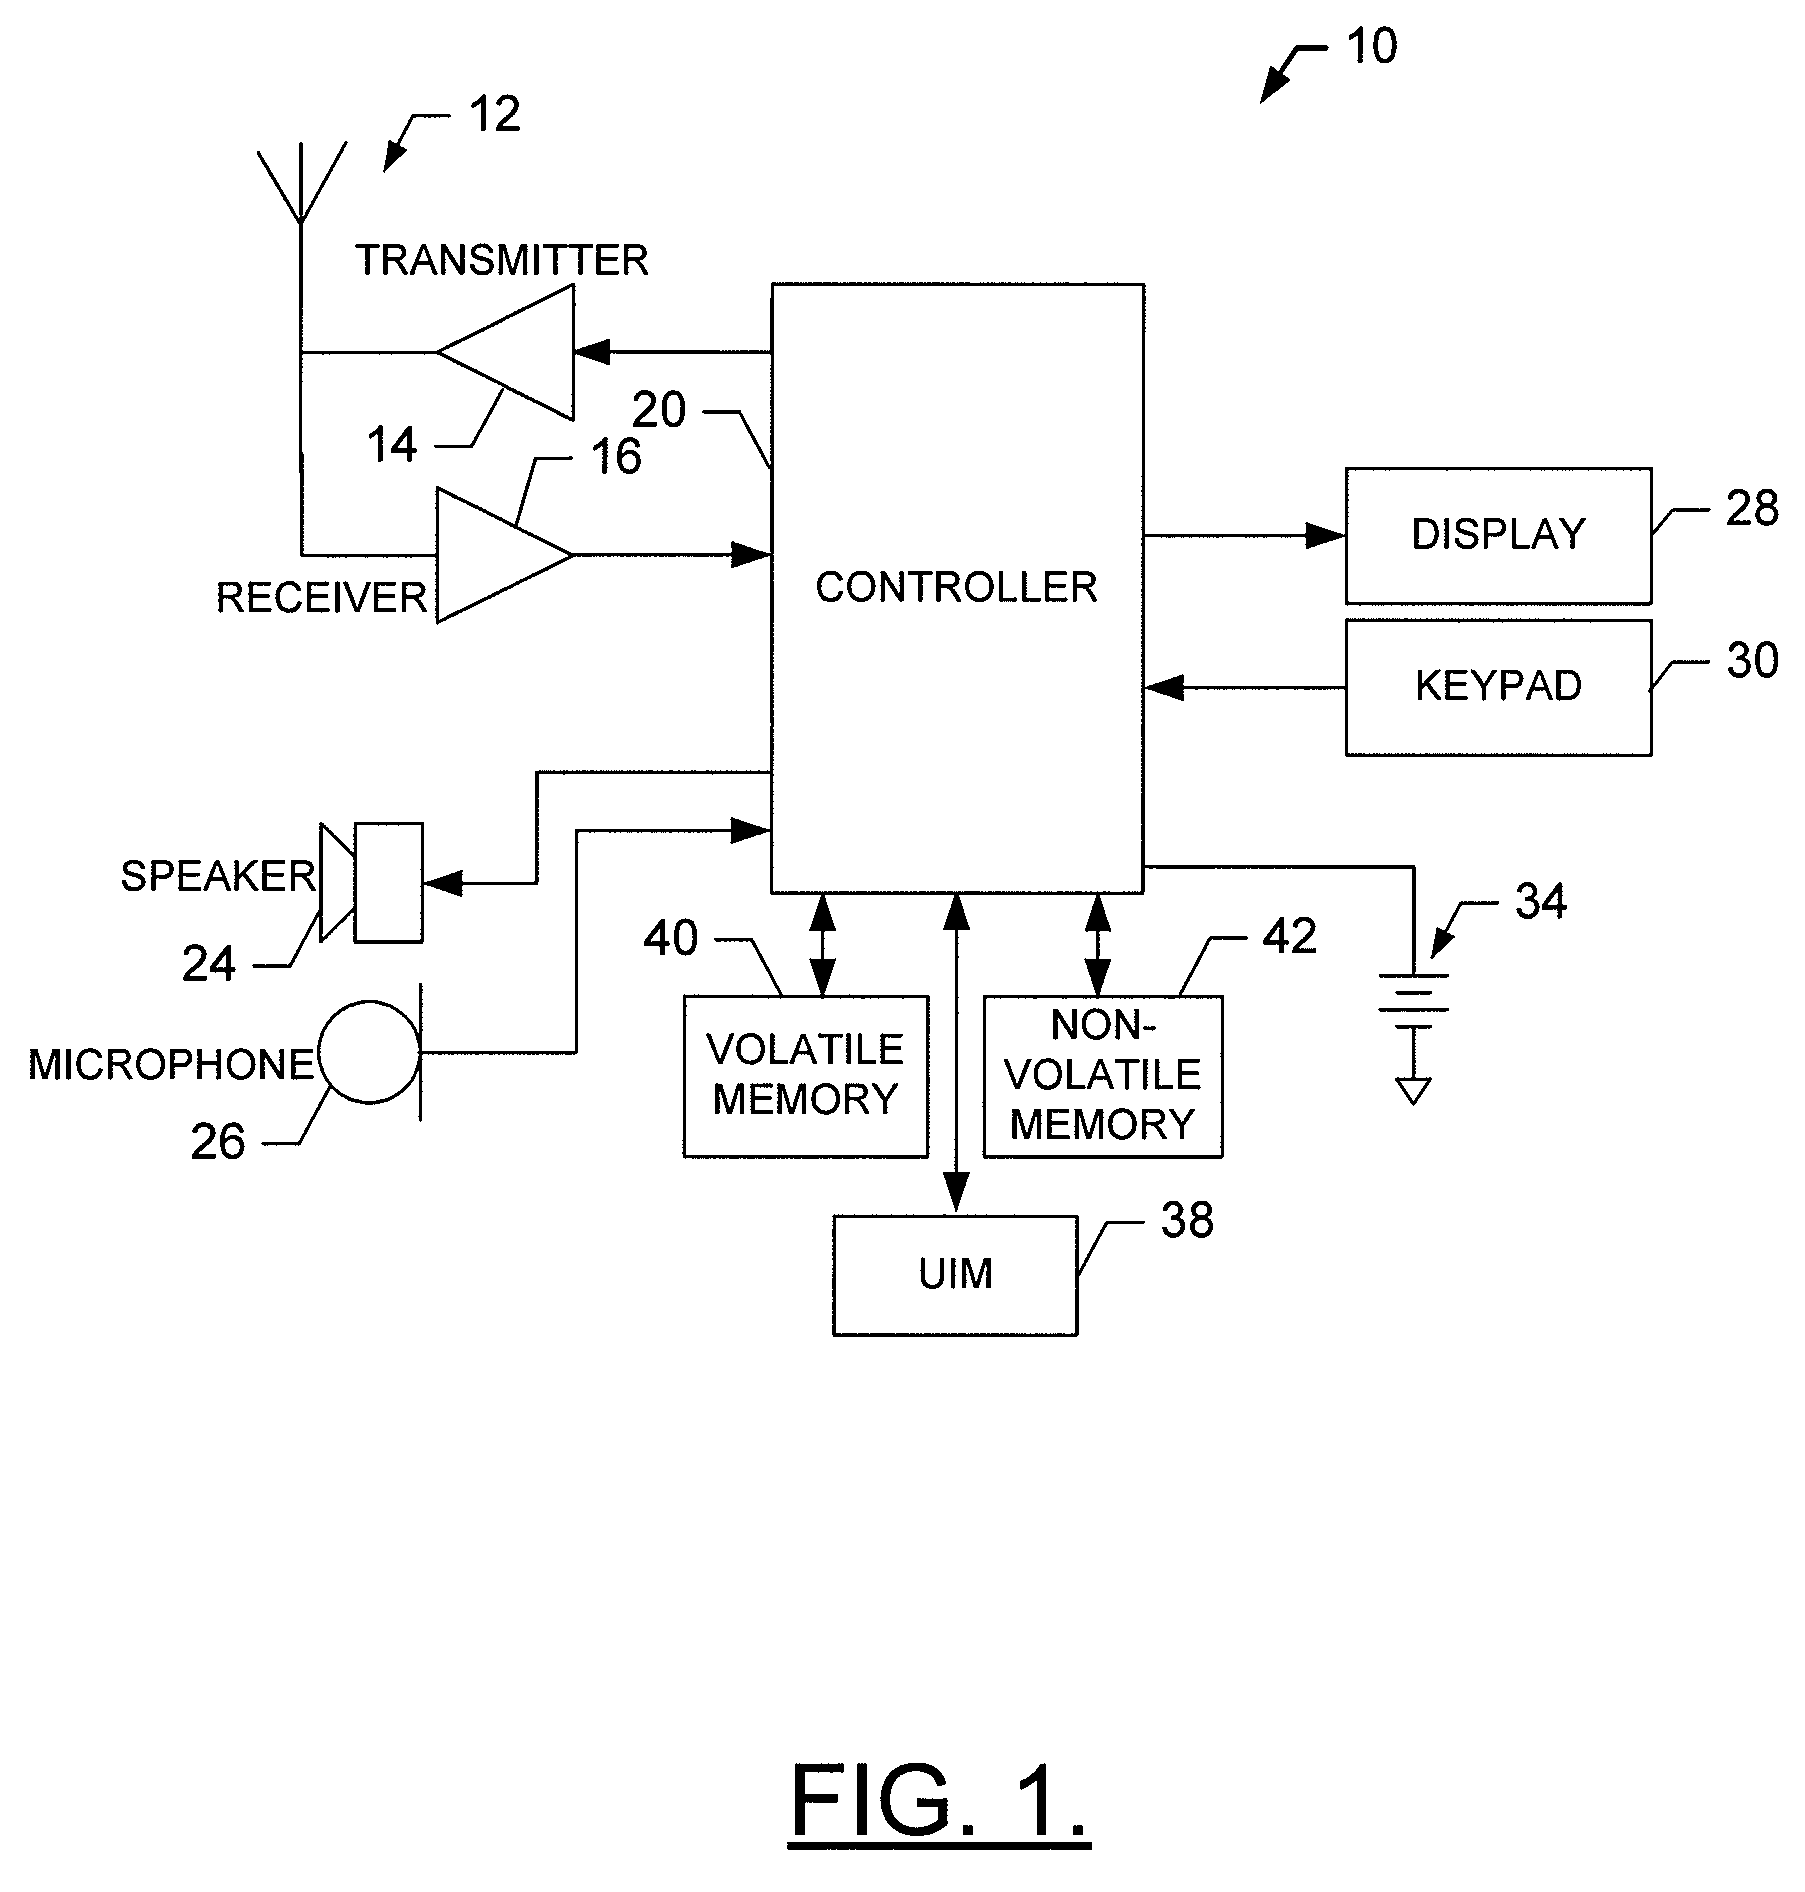 Method, Apparatus, and Computer Program Product for Privacy Management